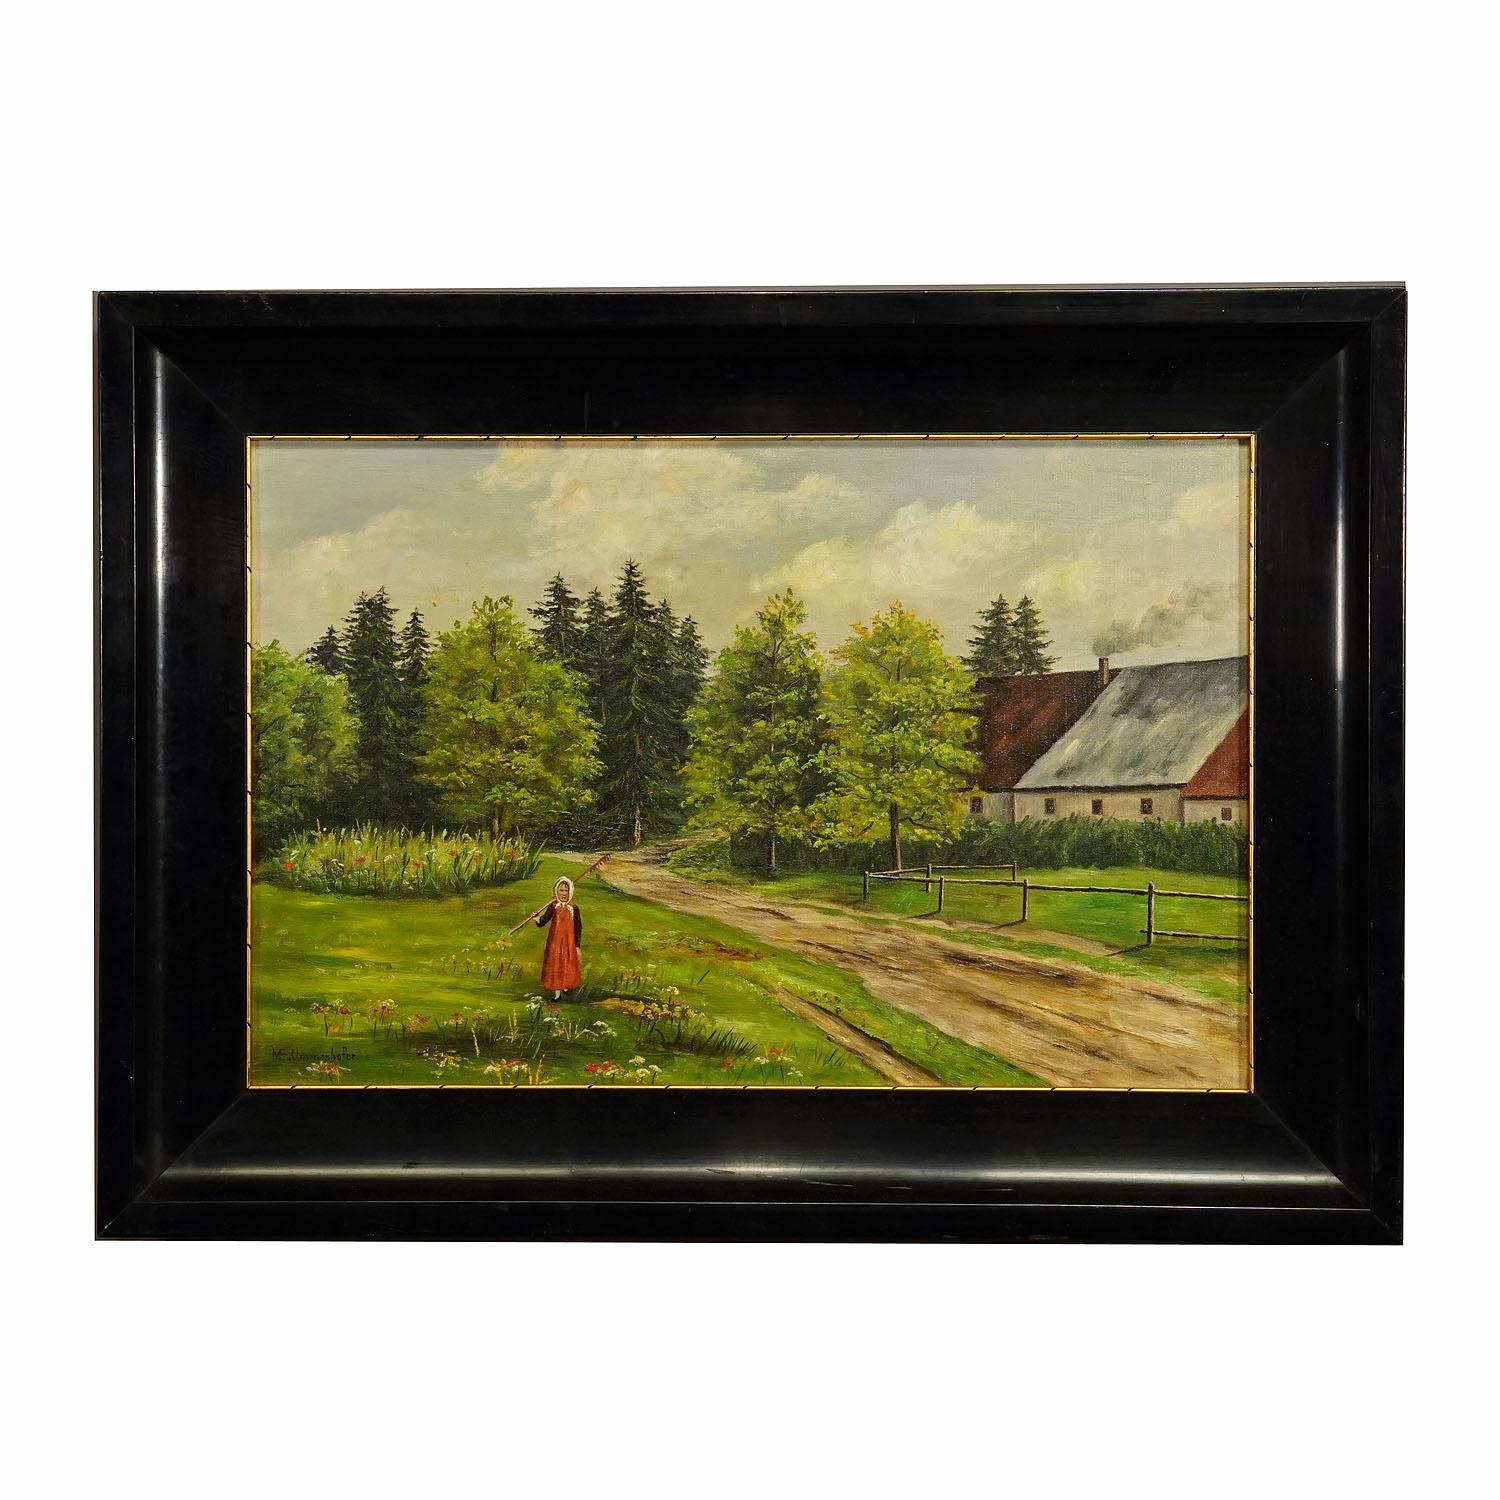 Antique oil painting farm girl on a flower meadow by M. E. Ummenhofer

An impressive antique oil painting depicting a farm girl on a summerly flower meadow with farm house in the background. Oil painting on canvas with pastell colors. Painted by